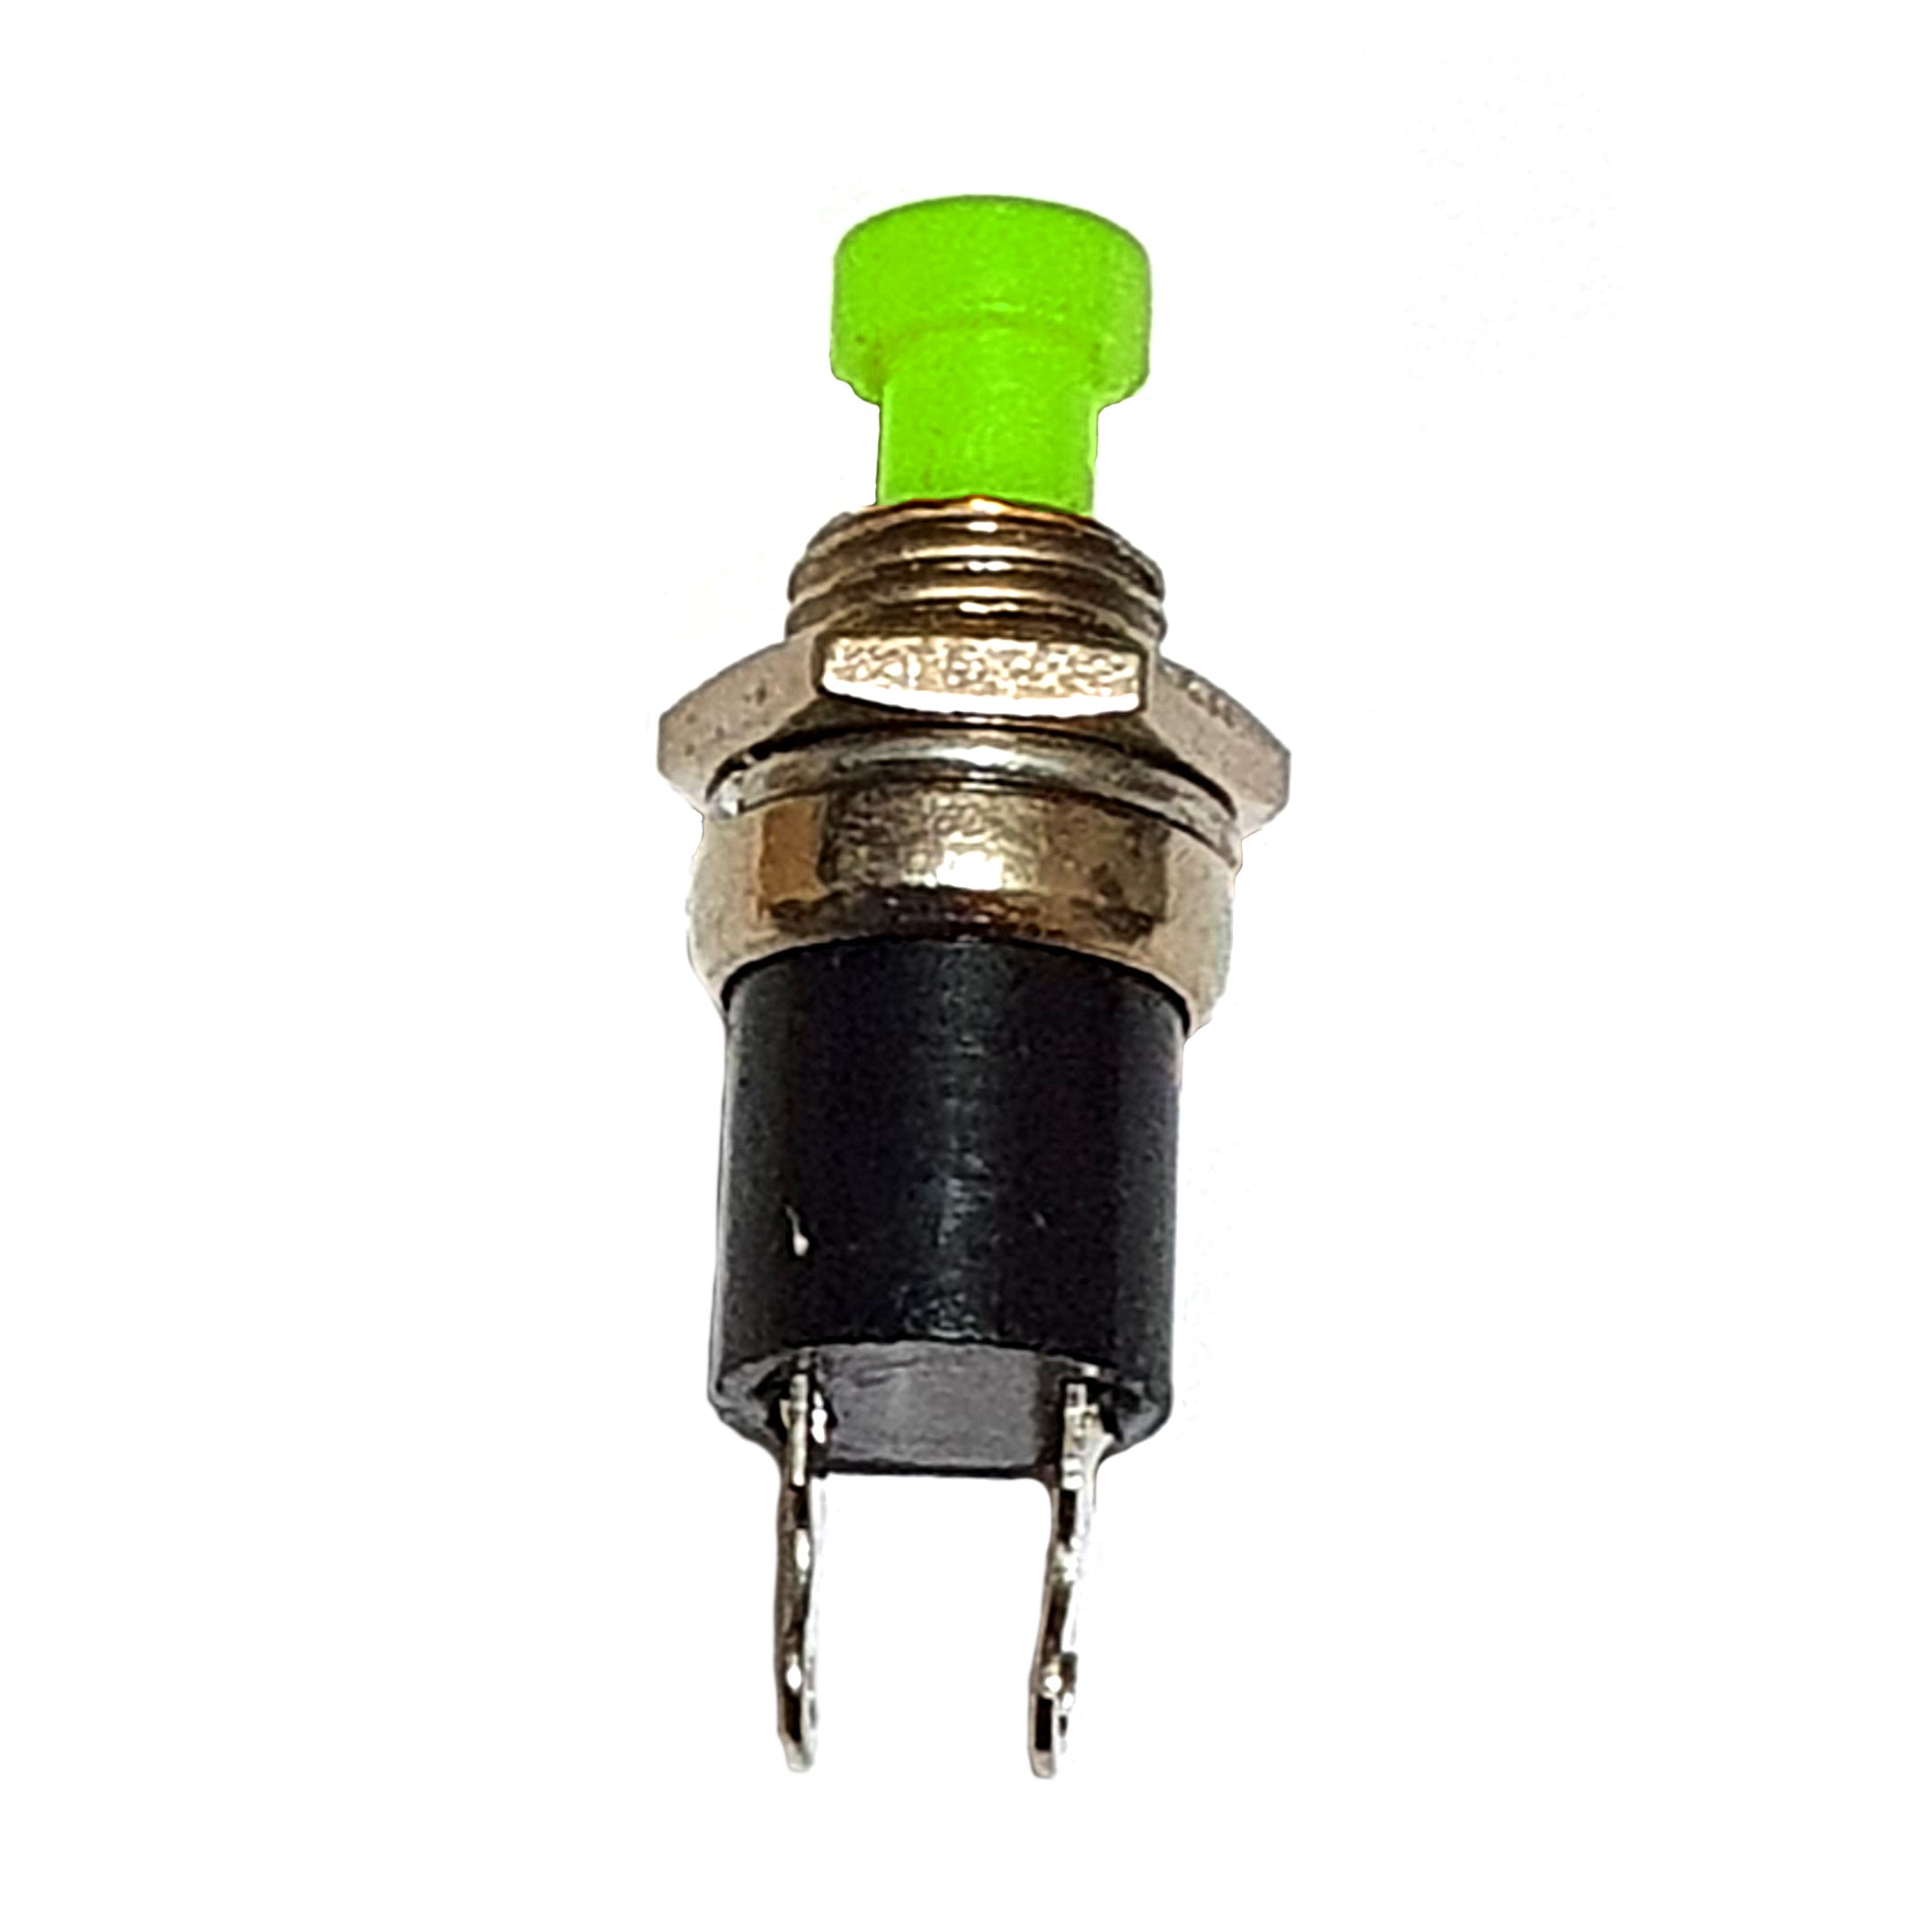 Miniature Push to make momentary switches with green button pack of 5